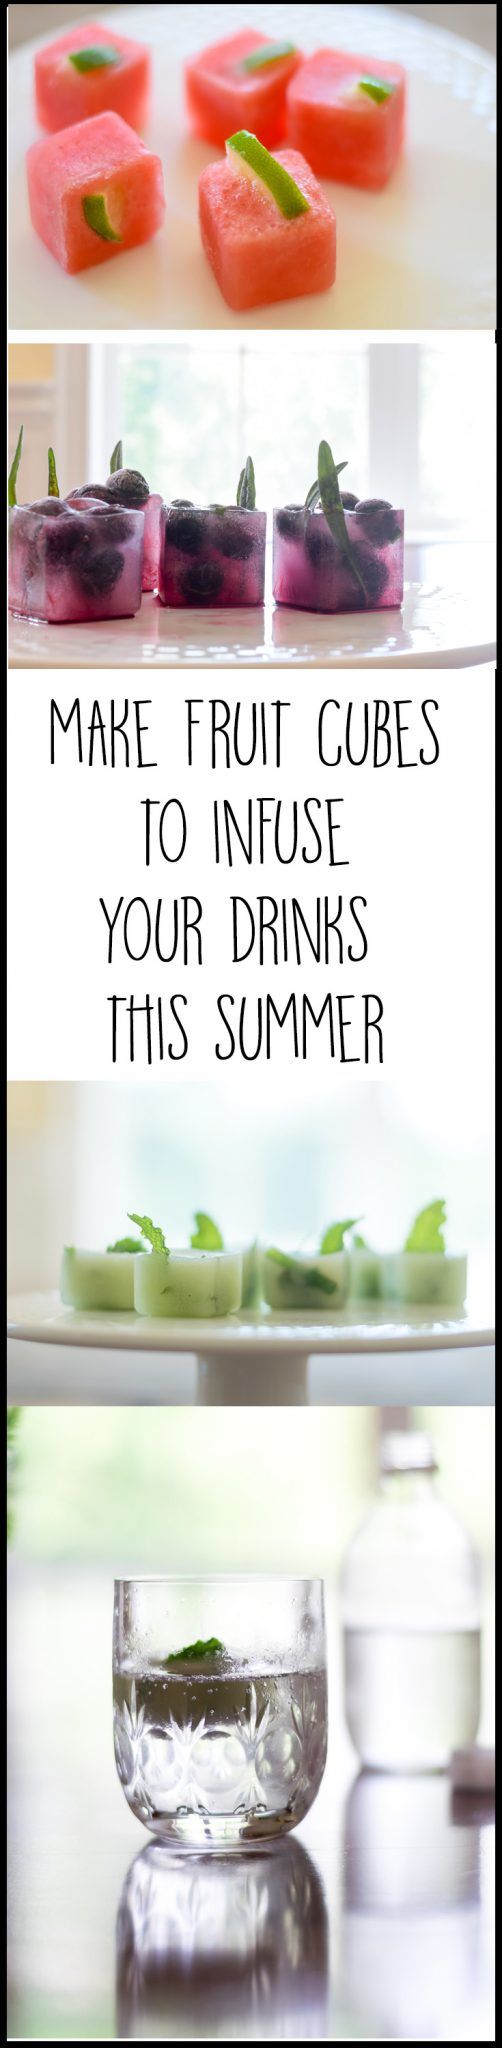 Fruit Infused Ice Cubes are the perfect way to add flavor to your water or favorite beverages this summer. Cucumber/Mint, Watermelon/Lime and Blueberry/Lavender are delicious combinations and make getting that daily water quota all the more enjoyable.